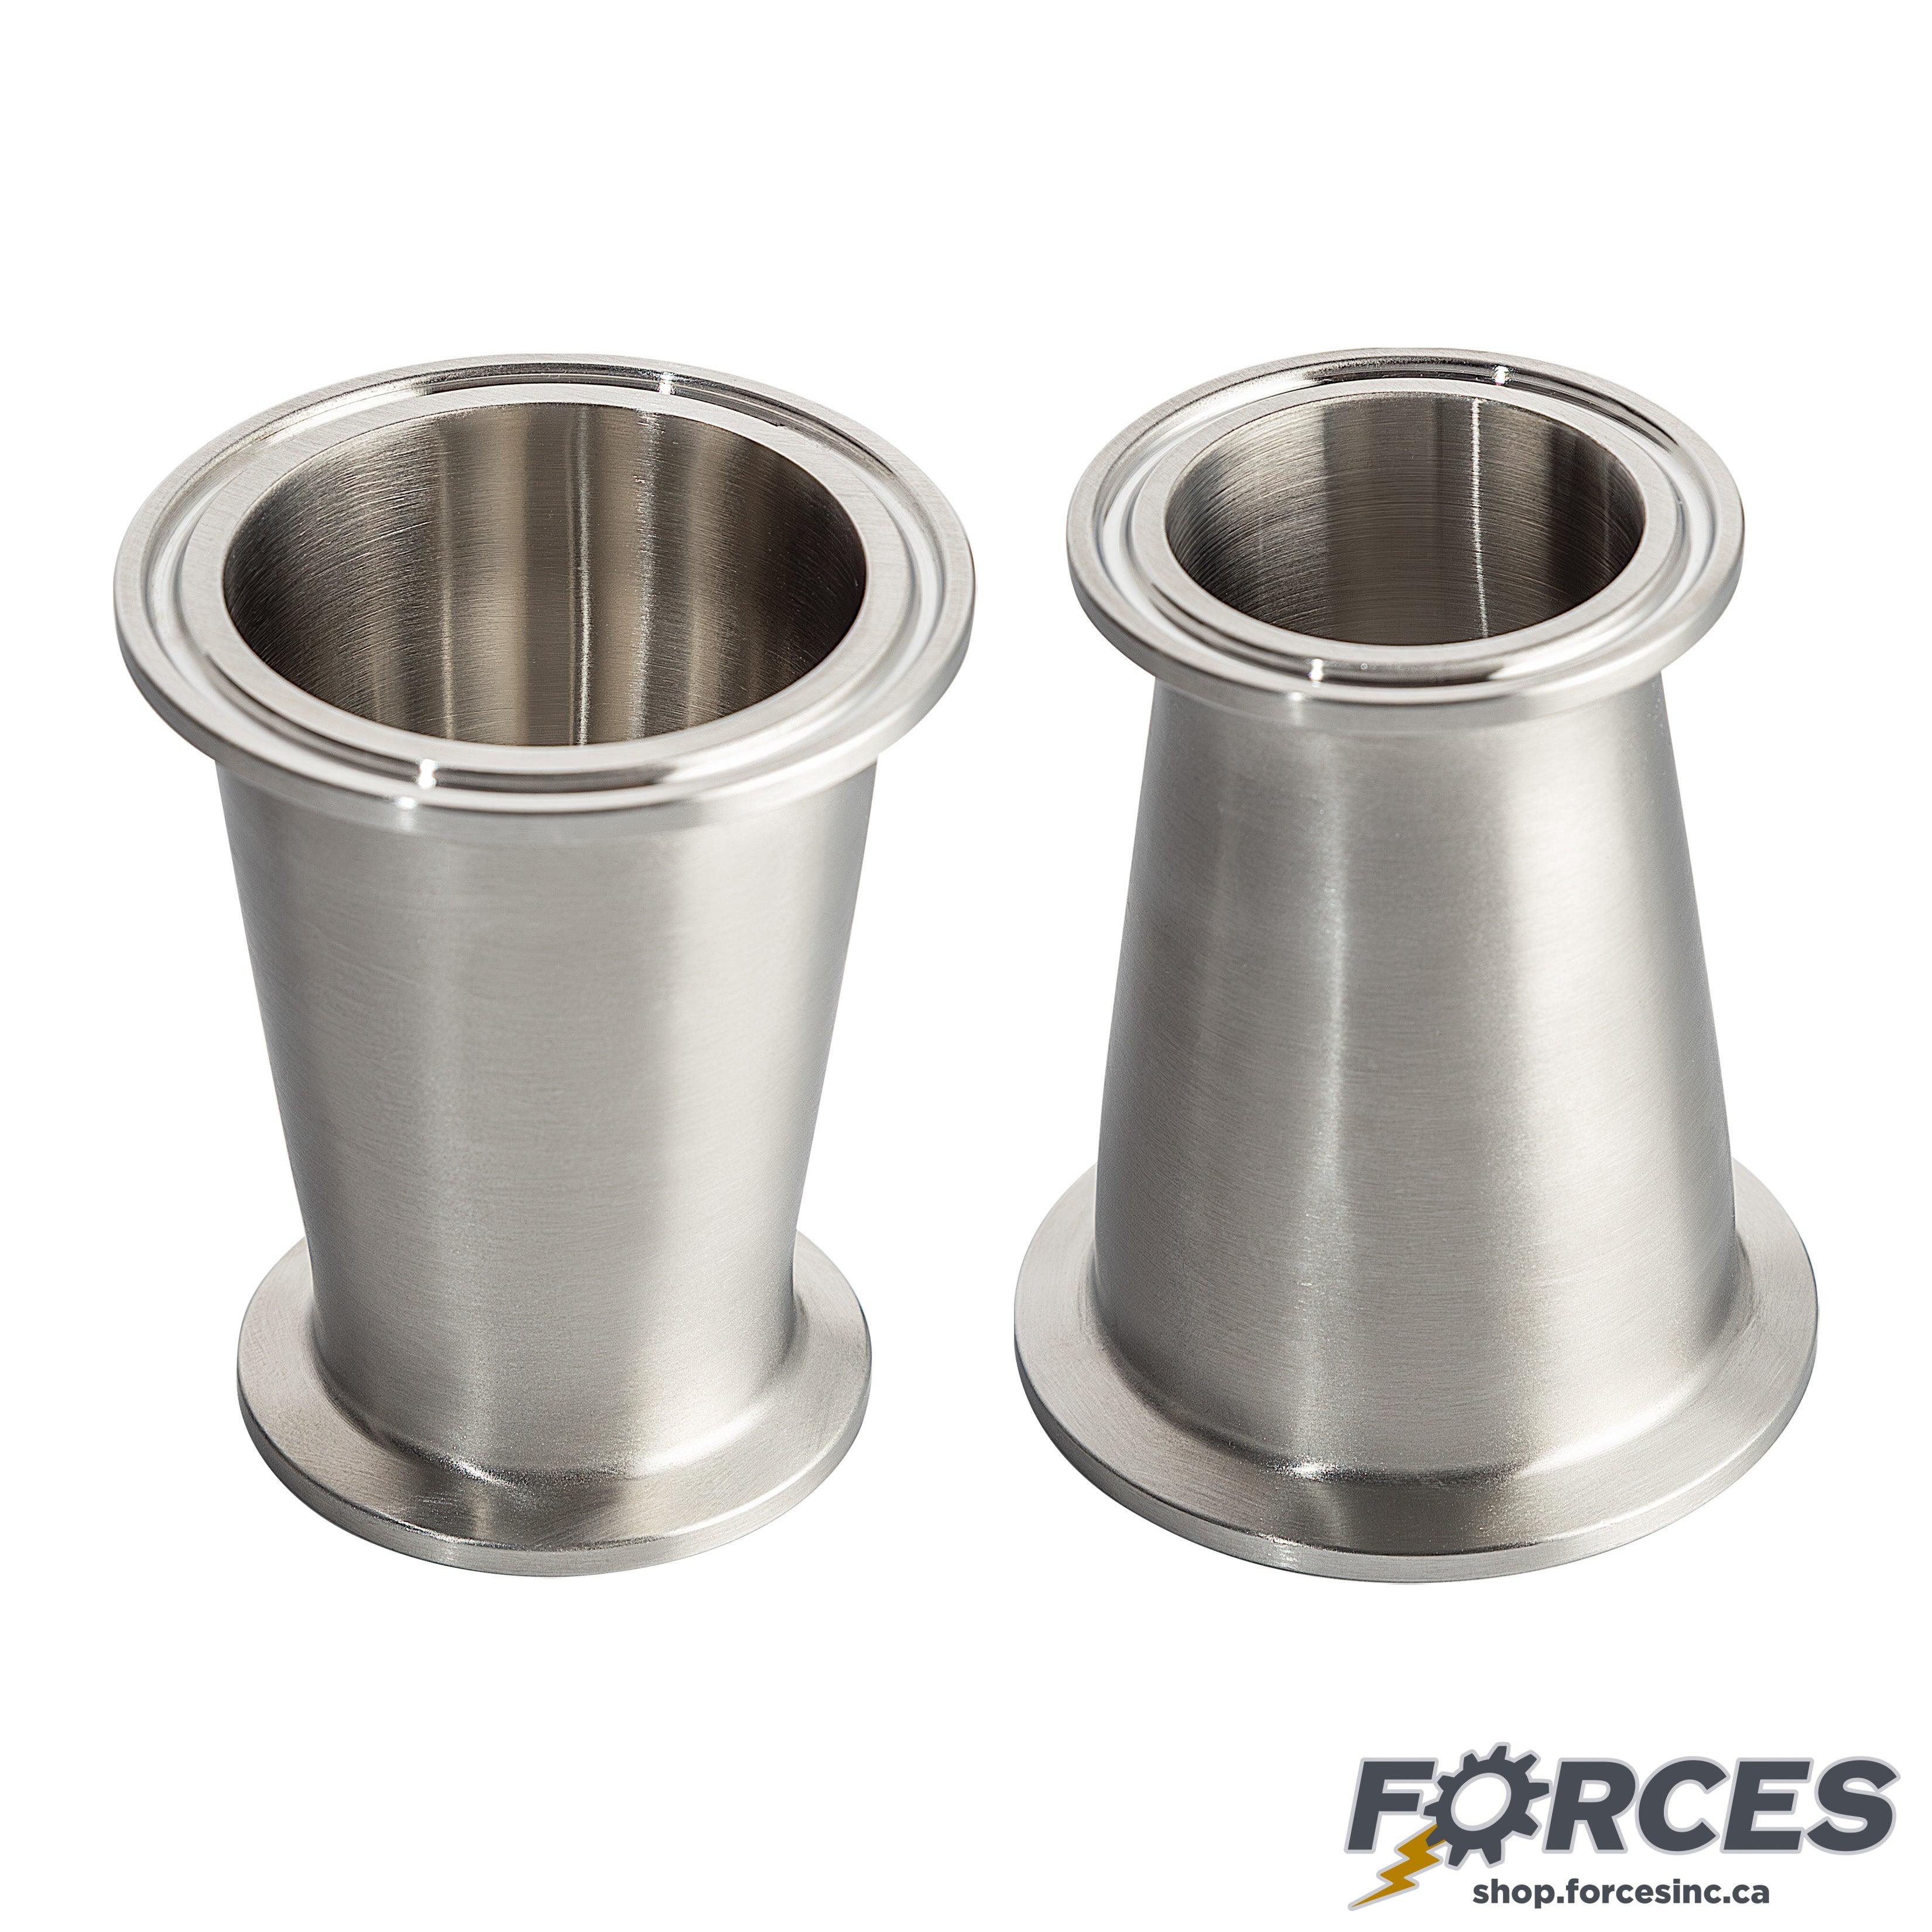 2-1/2" x 1-1/2" Tri-Clamp Concentric Reducer - Stainless Steel 316 - Forces Inc